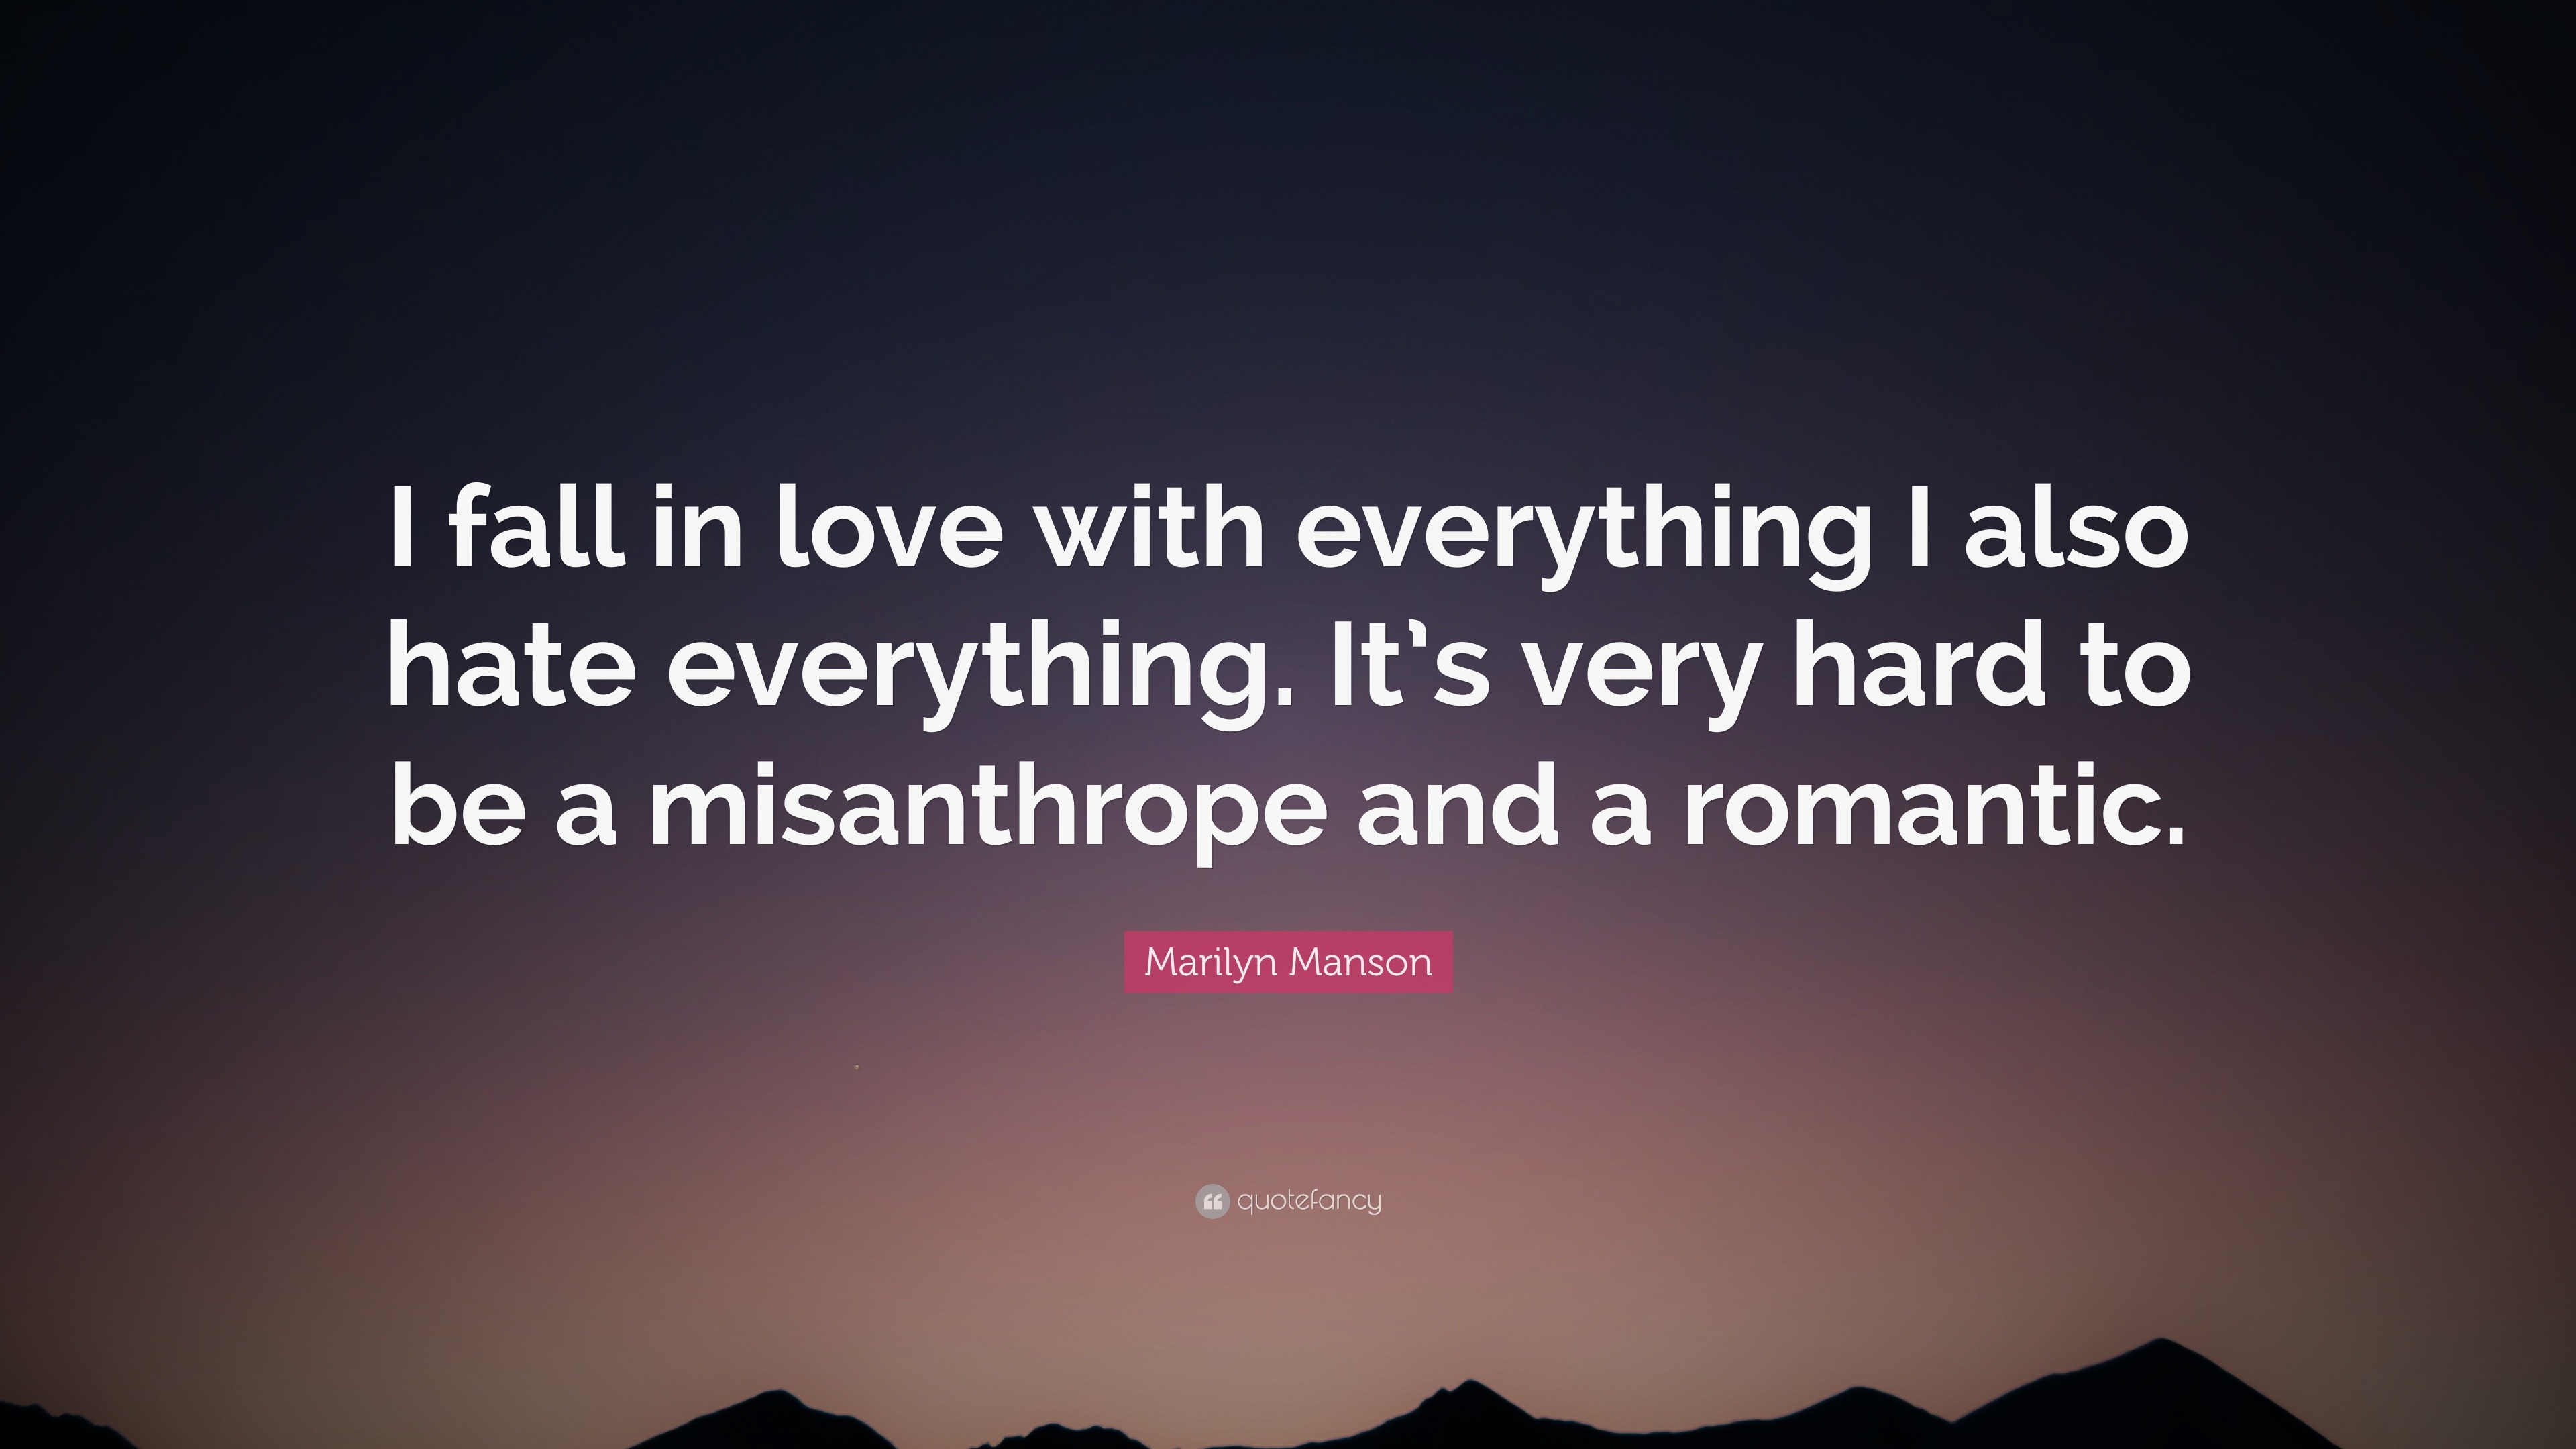 Marilyn Manson Quote “I fall in love with everything I also hate everything